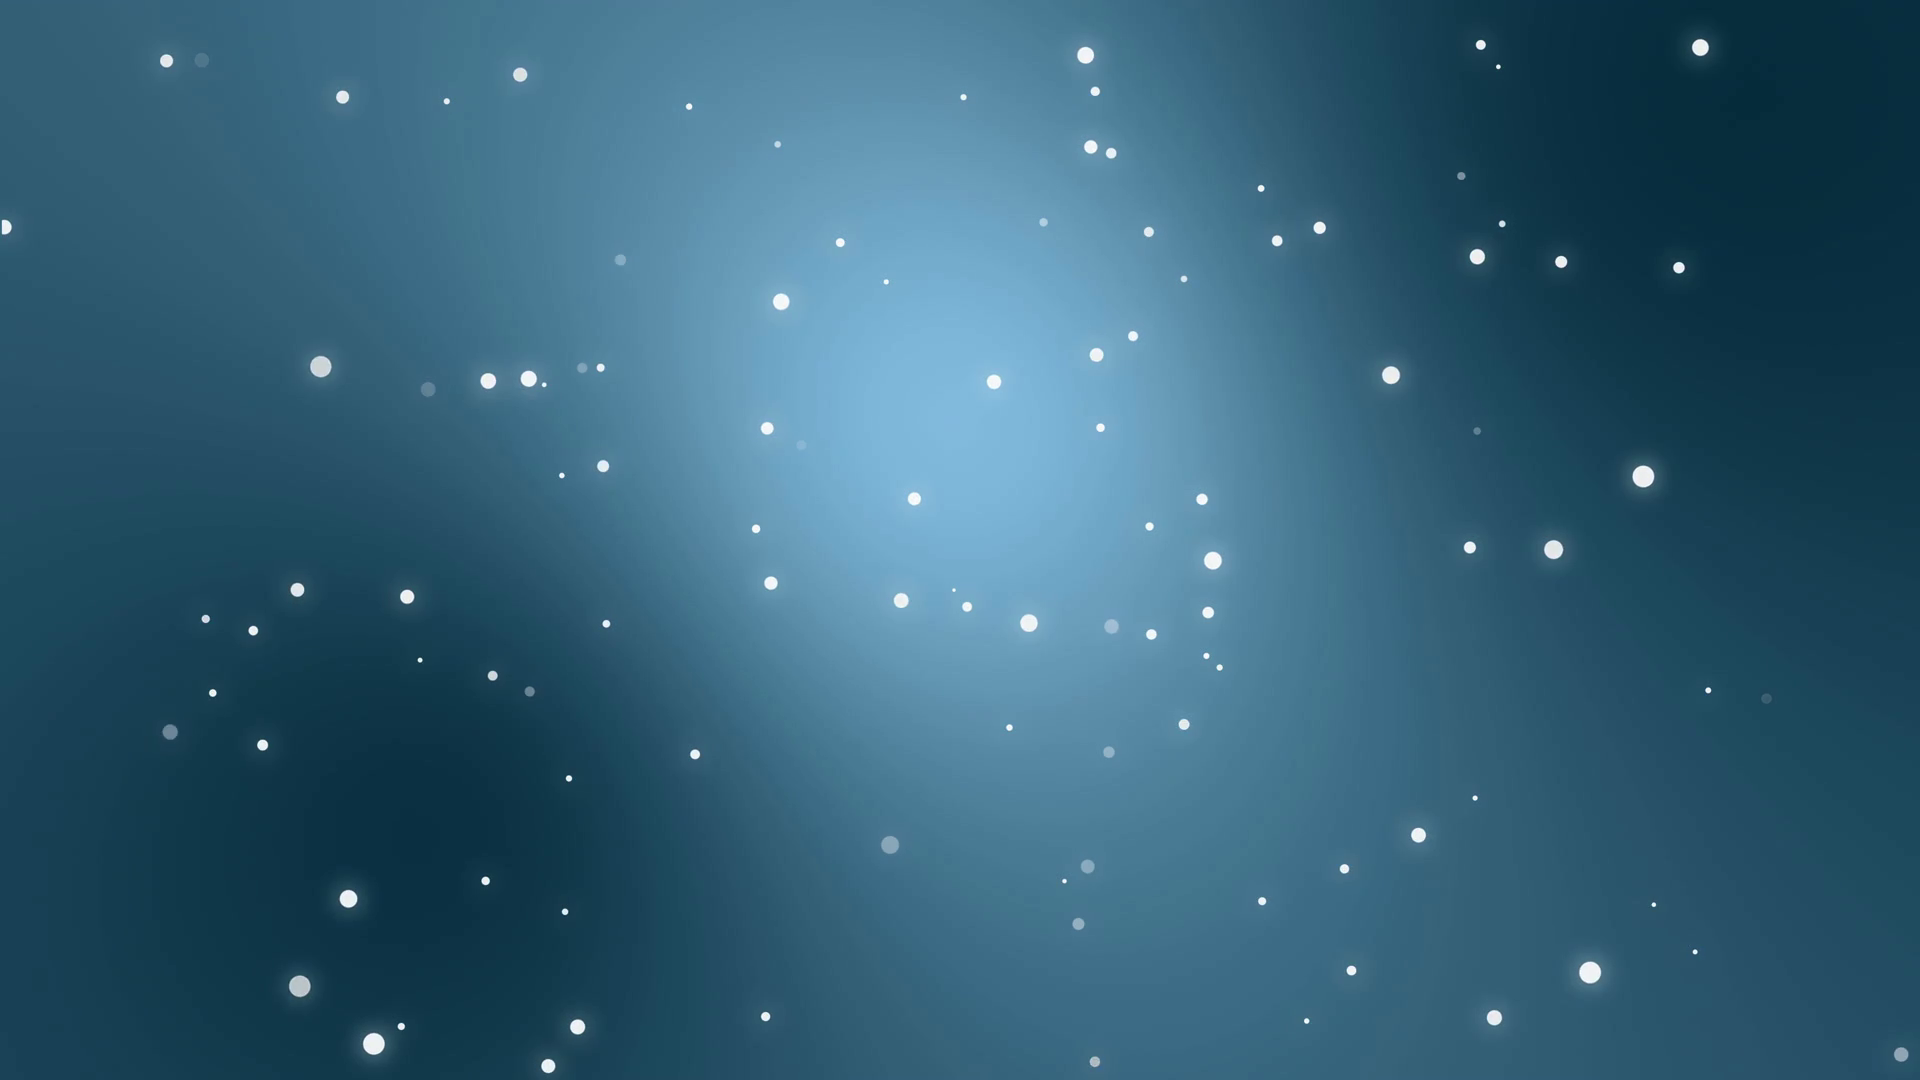 Animated dark blue night sky background with sparkling particle ...